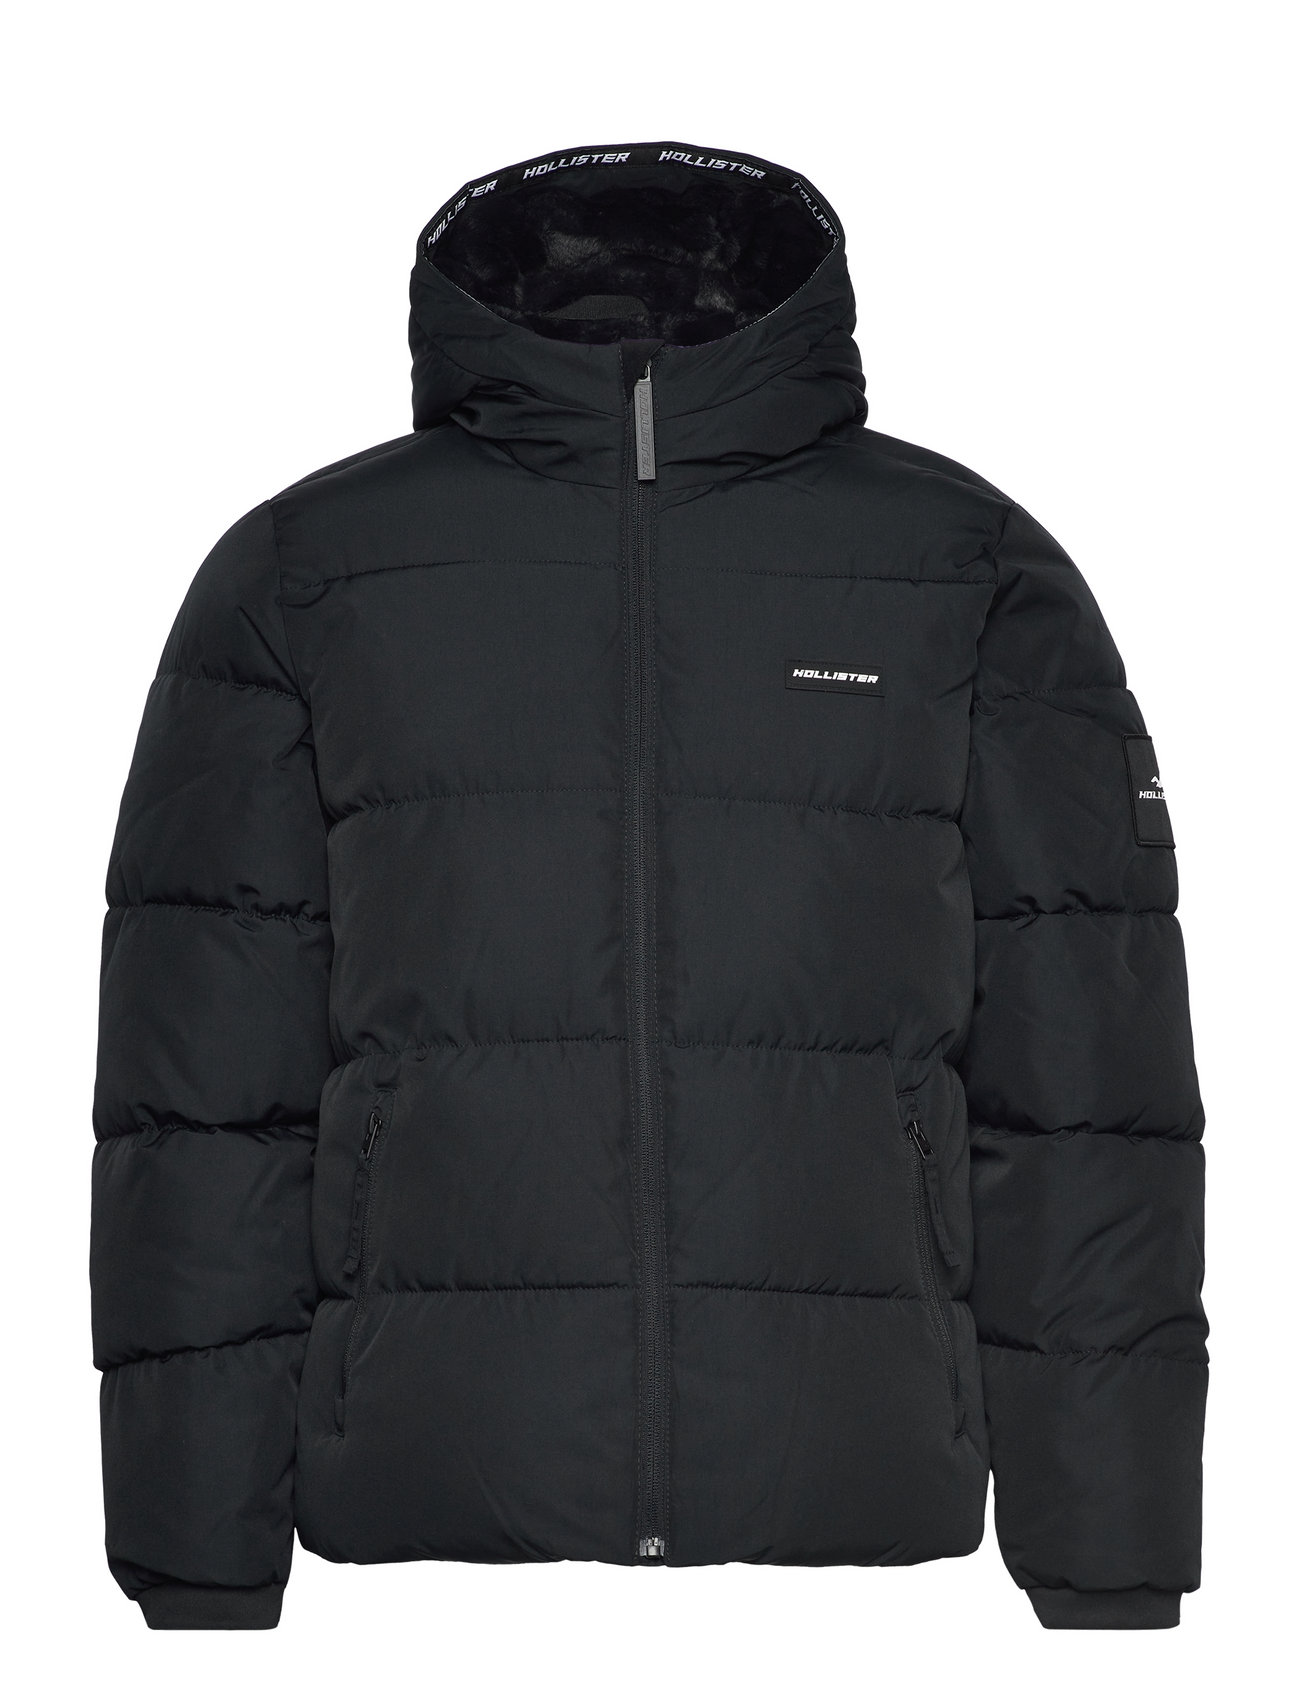 Hollister Hco. Guys Outerwear (Black), (129.12 €) | Large of outlet-styles | Booztlet.com